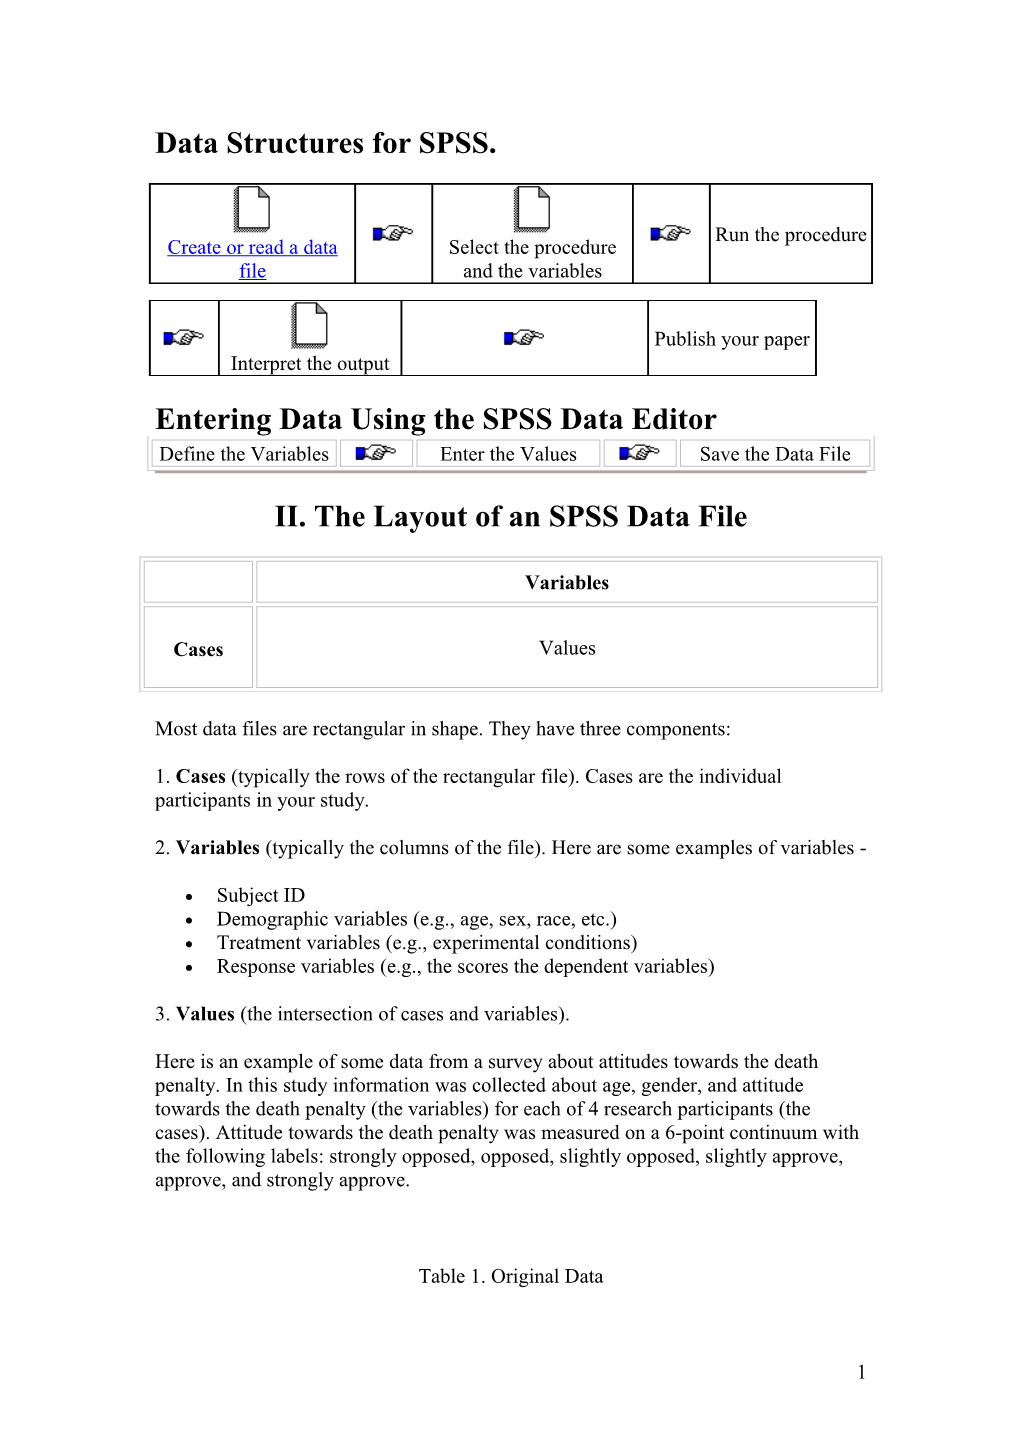 Data Structures for SPSS